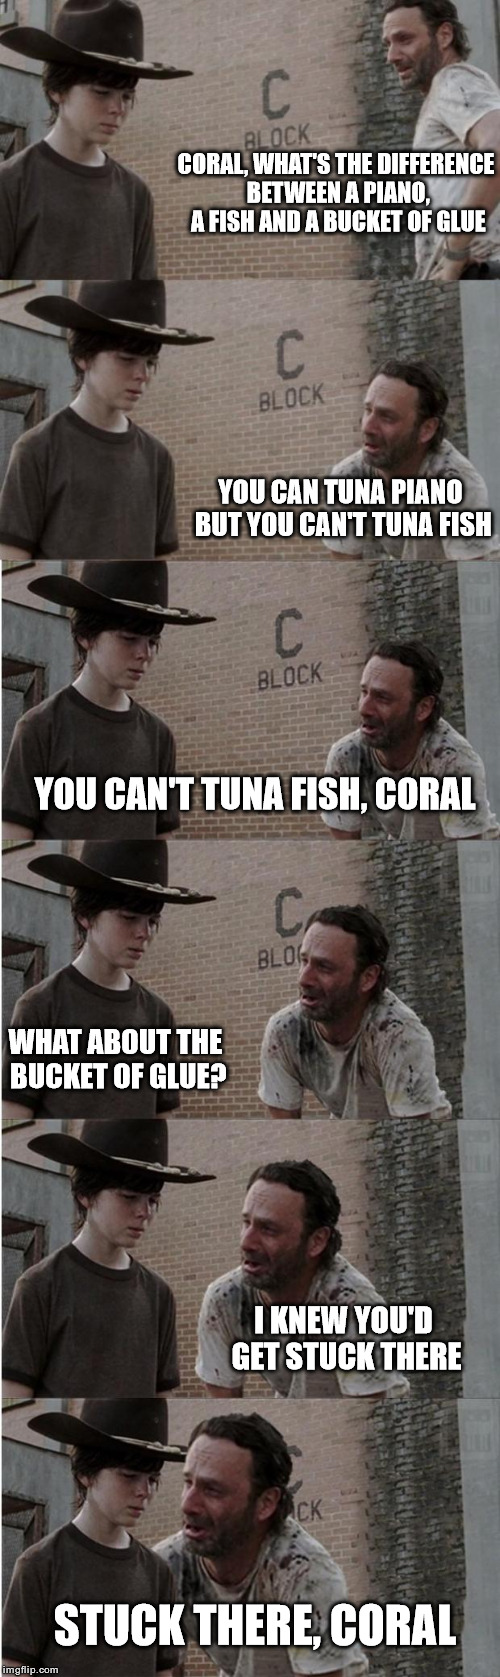 Rick and Carl Longer Meme | CORAL, WHAT'S THE DIFFERENCE BETWEEN A PIANO, A FISH AND A BUCKET OF GLUE; YOU CAN TUNA PIANO BUT YOU CAN'T TUNA FISH; YOU CAN'T TUNA FISH, CORAL; WHAT ABOUT THE BUCKET OF GLUE? I KNEW YOU'D GET STUCK THERE; STUCK THERE, CORAL | image tagged in memes,rick and carl longer | made w/ Imgflip meme maker